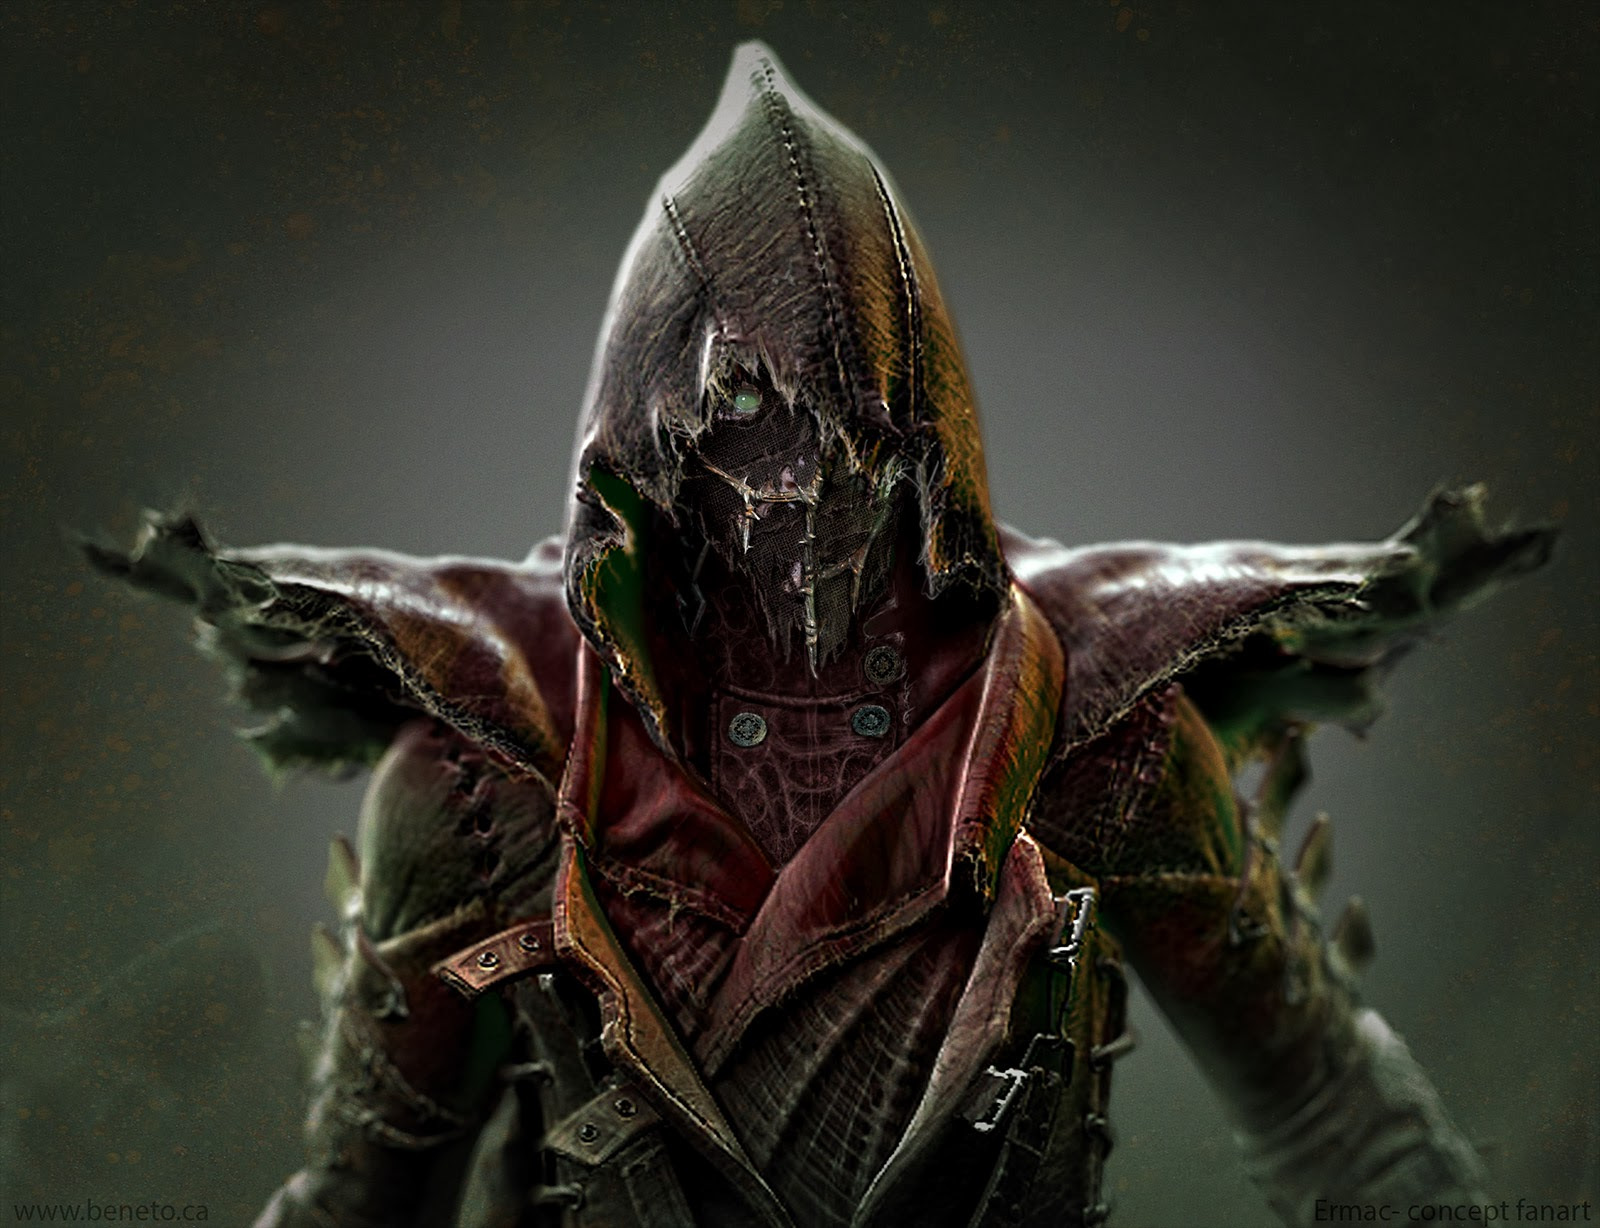 Ermac Concept Art Could Be A Preview of His Mortal Kombat X Appearance